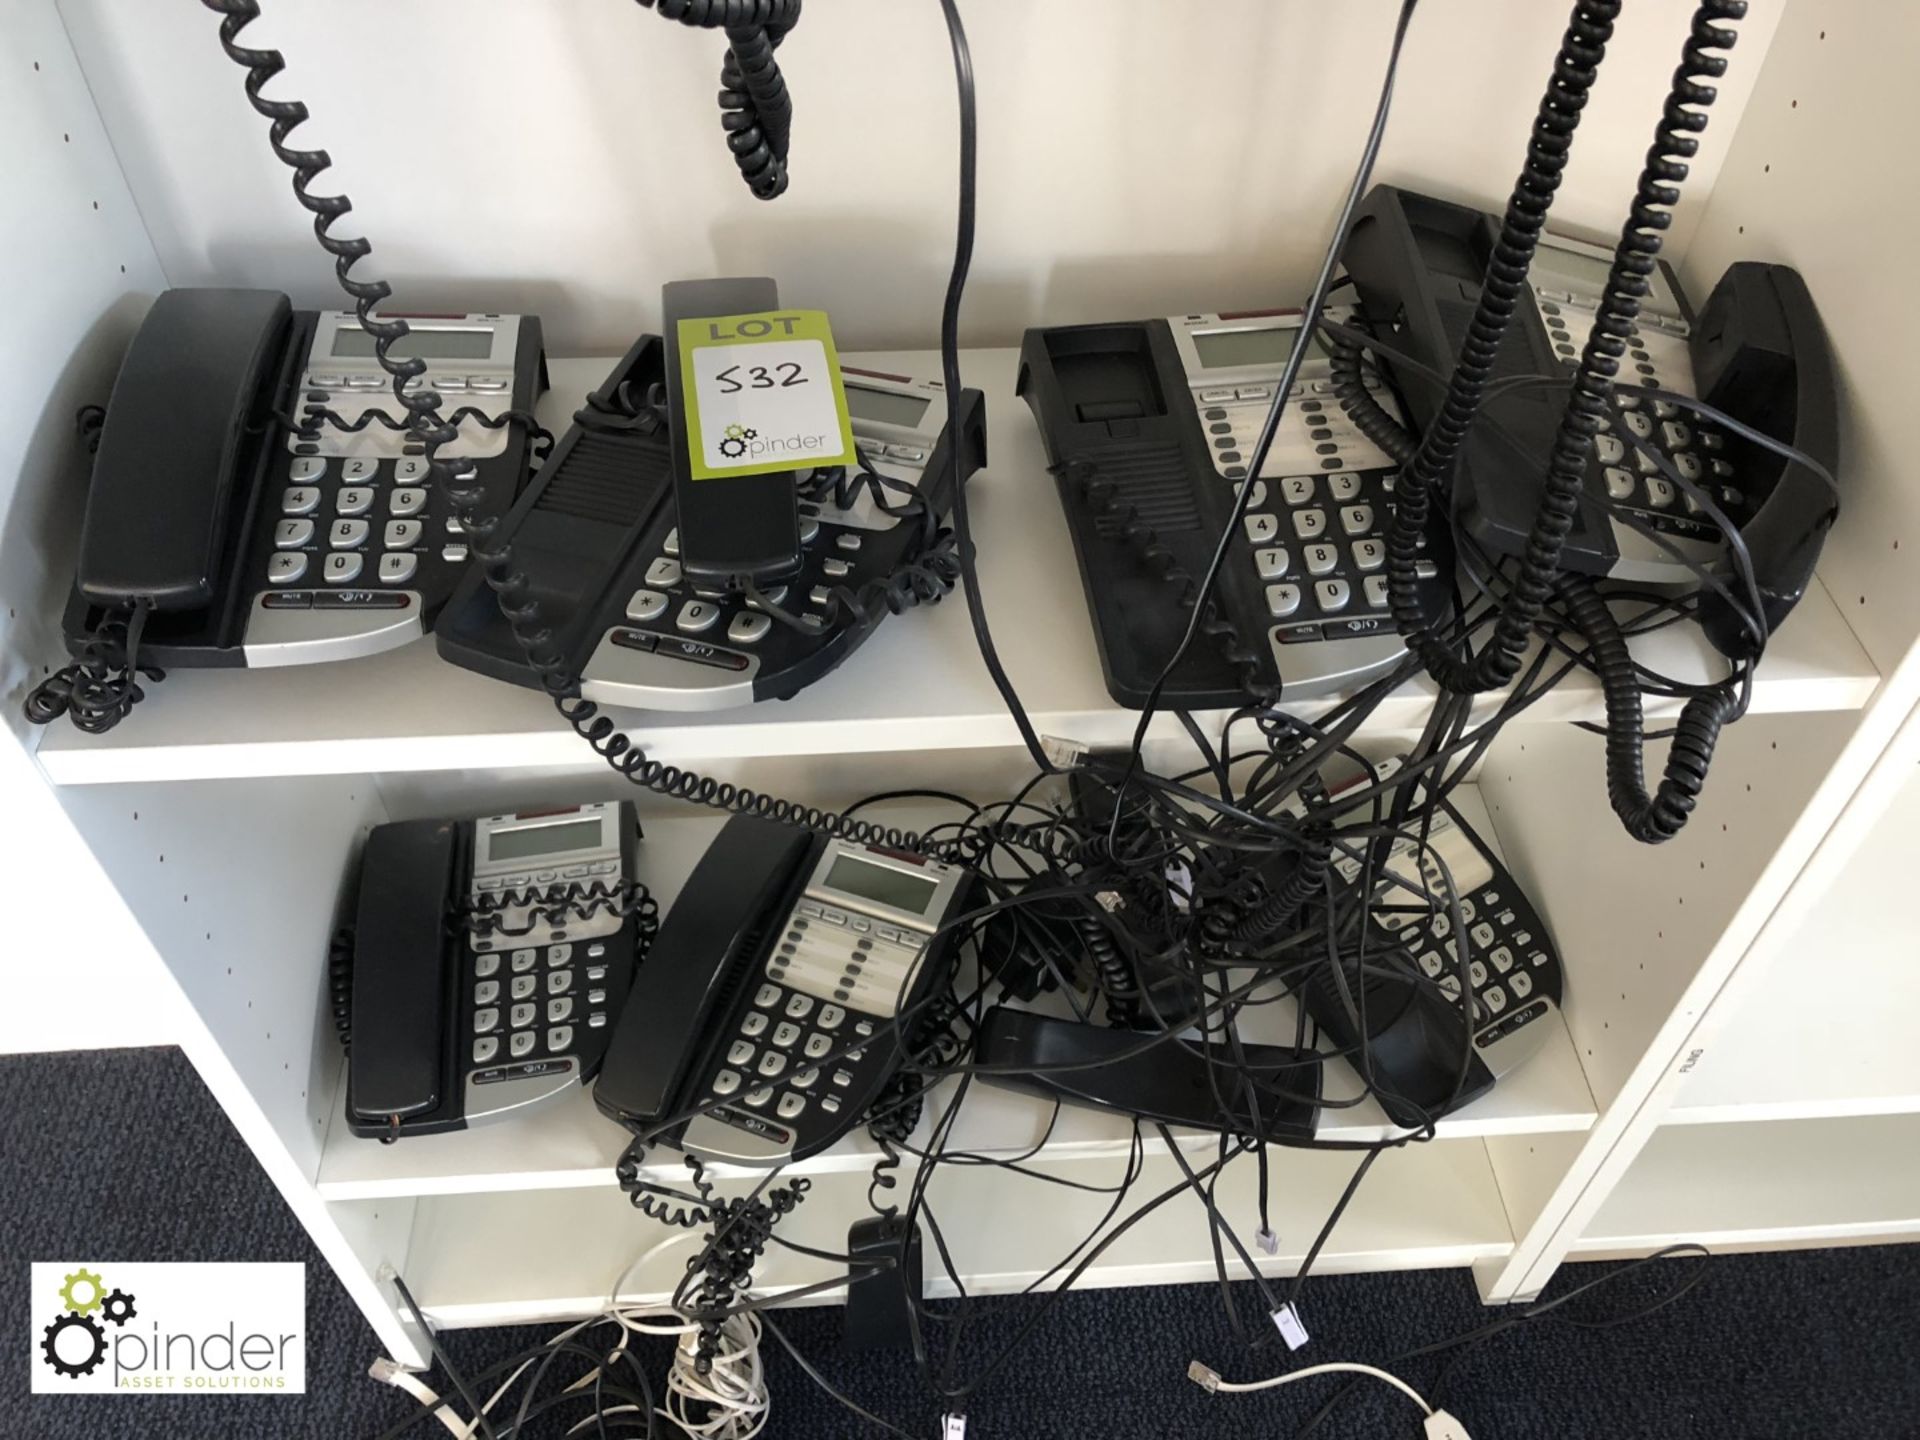 10 Orchid DX800 Telephone Handsets and 2 Interquartz Telephone Handsets (located in Suites 8-10, - Image 2 of 2